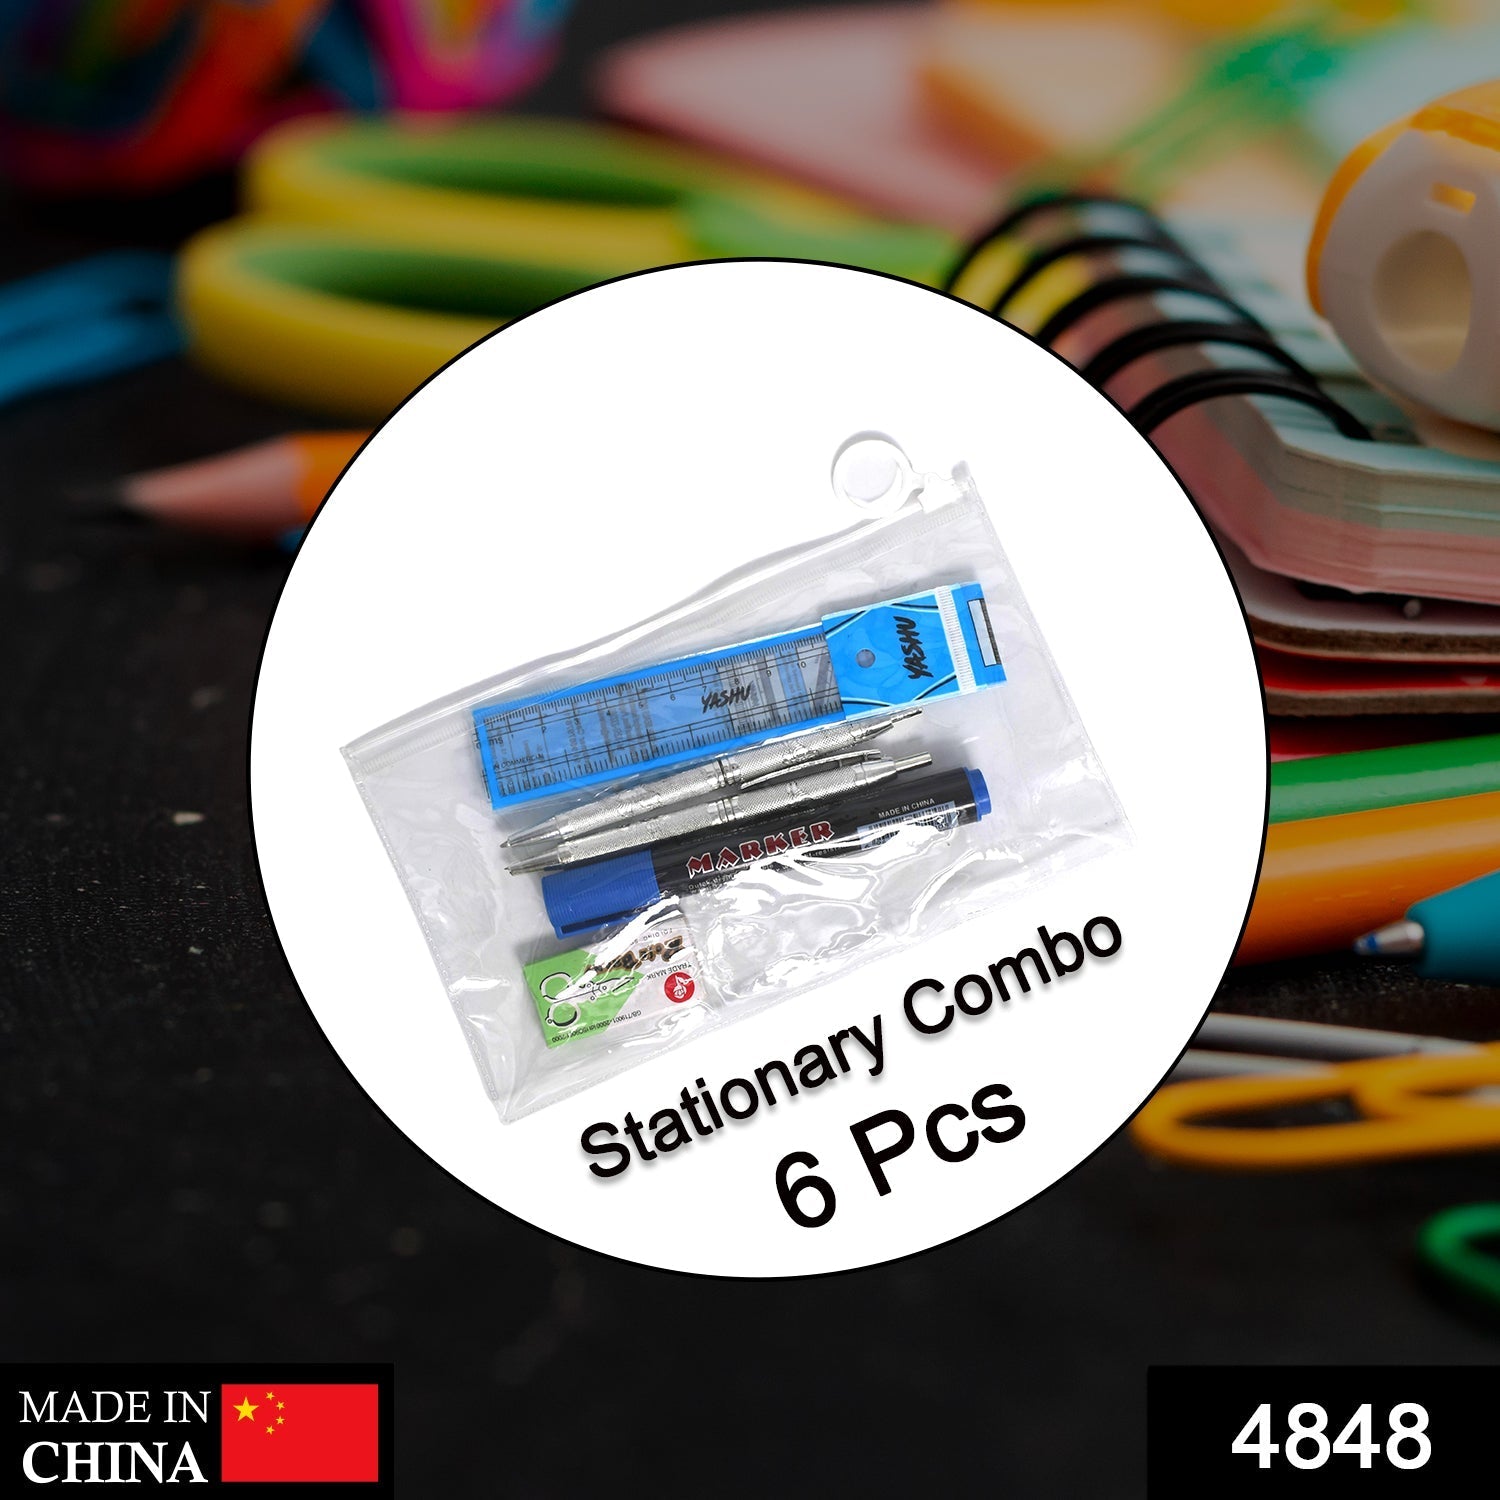 4848  6-Pcs Combo Zipper Pouch scissor Ruler Pen And Marker Used While Studying By Teachers And Students In Schools And Colleges Etc. DeoDap